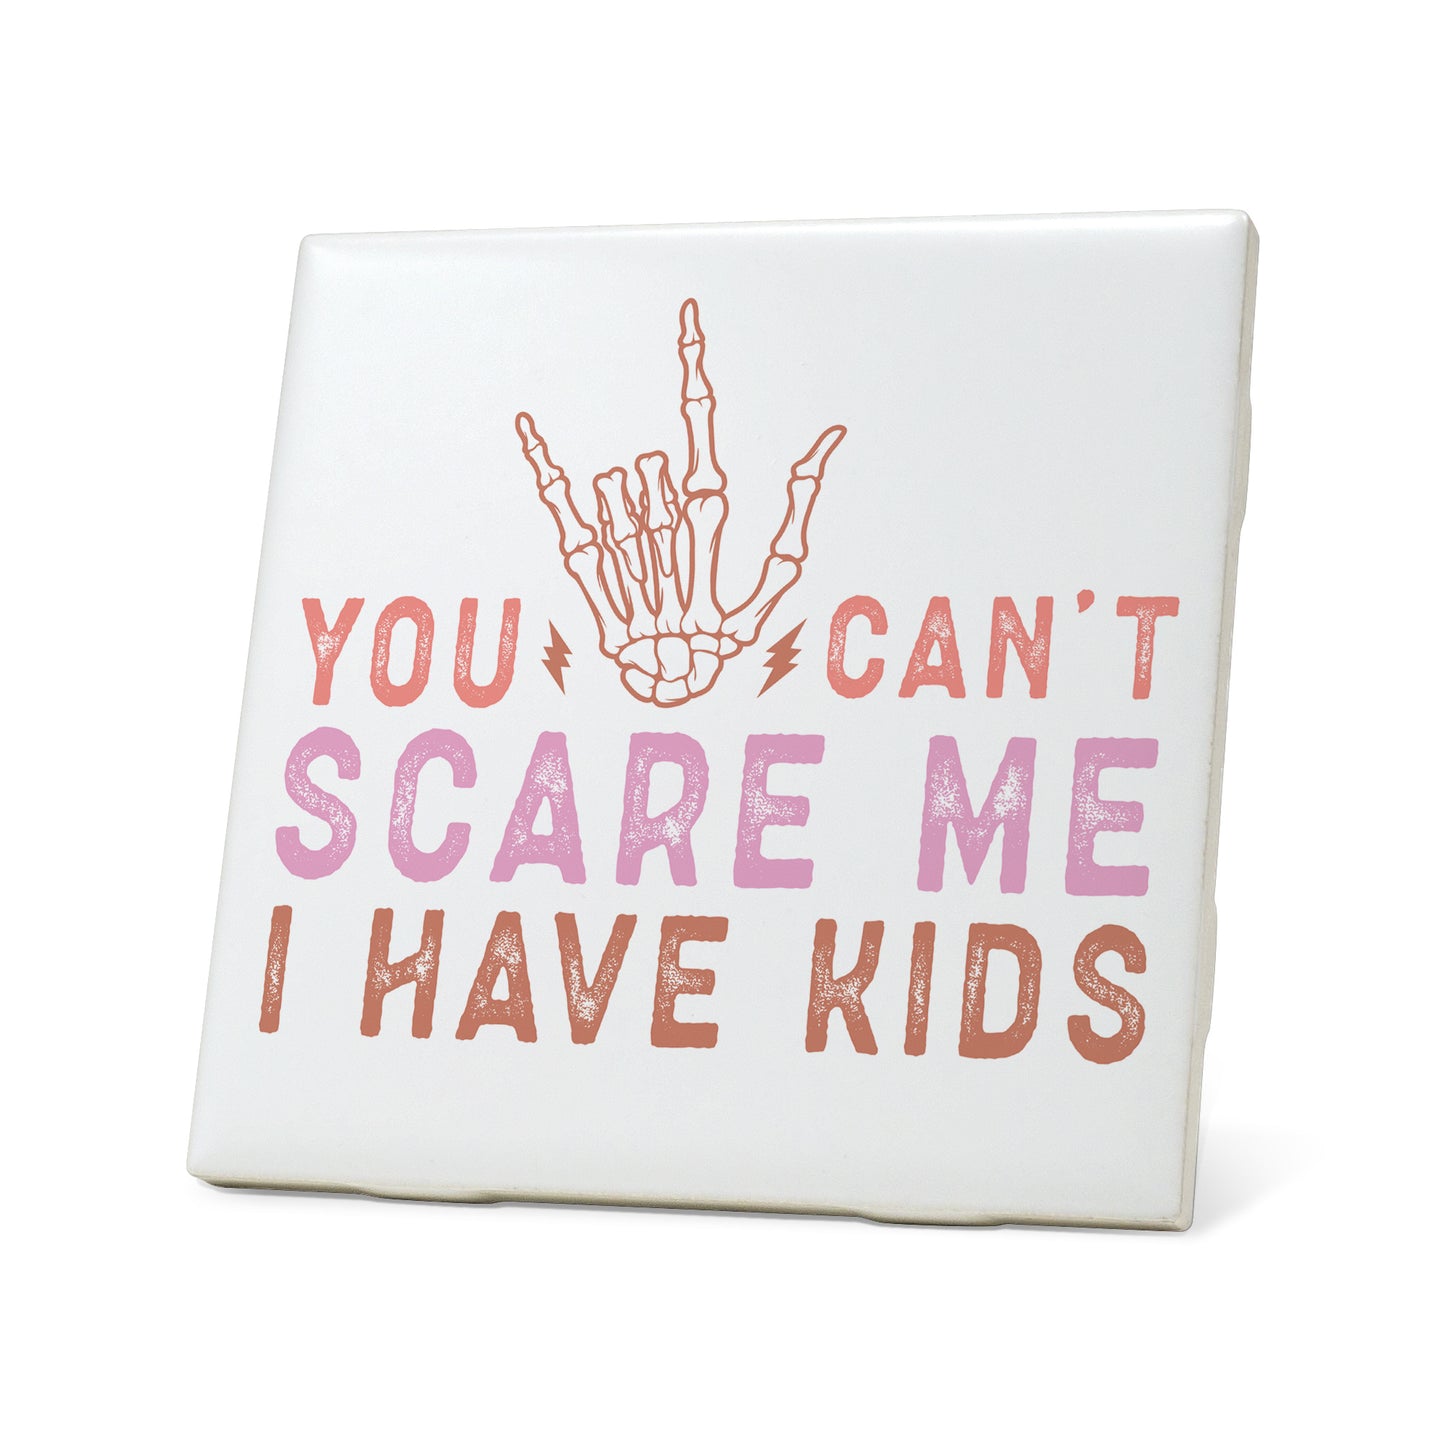 I have kids Graphic Coasters